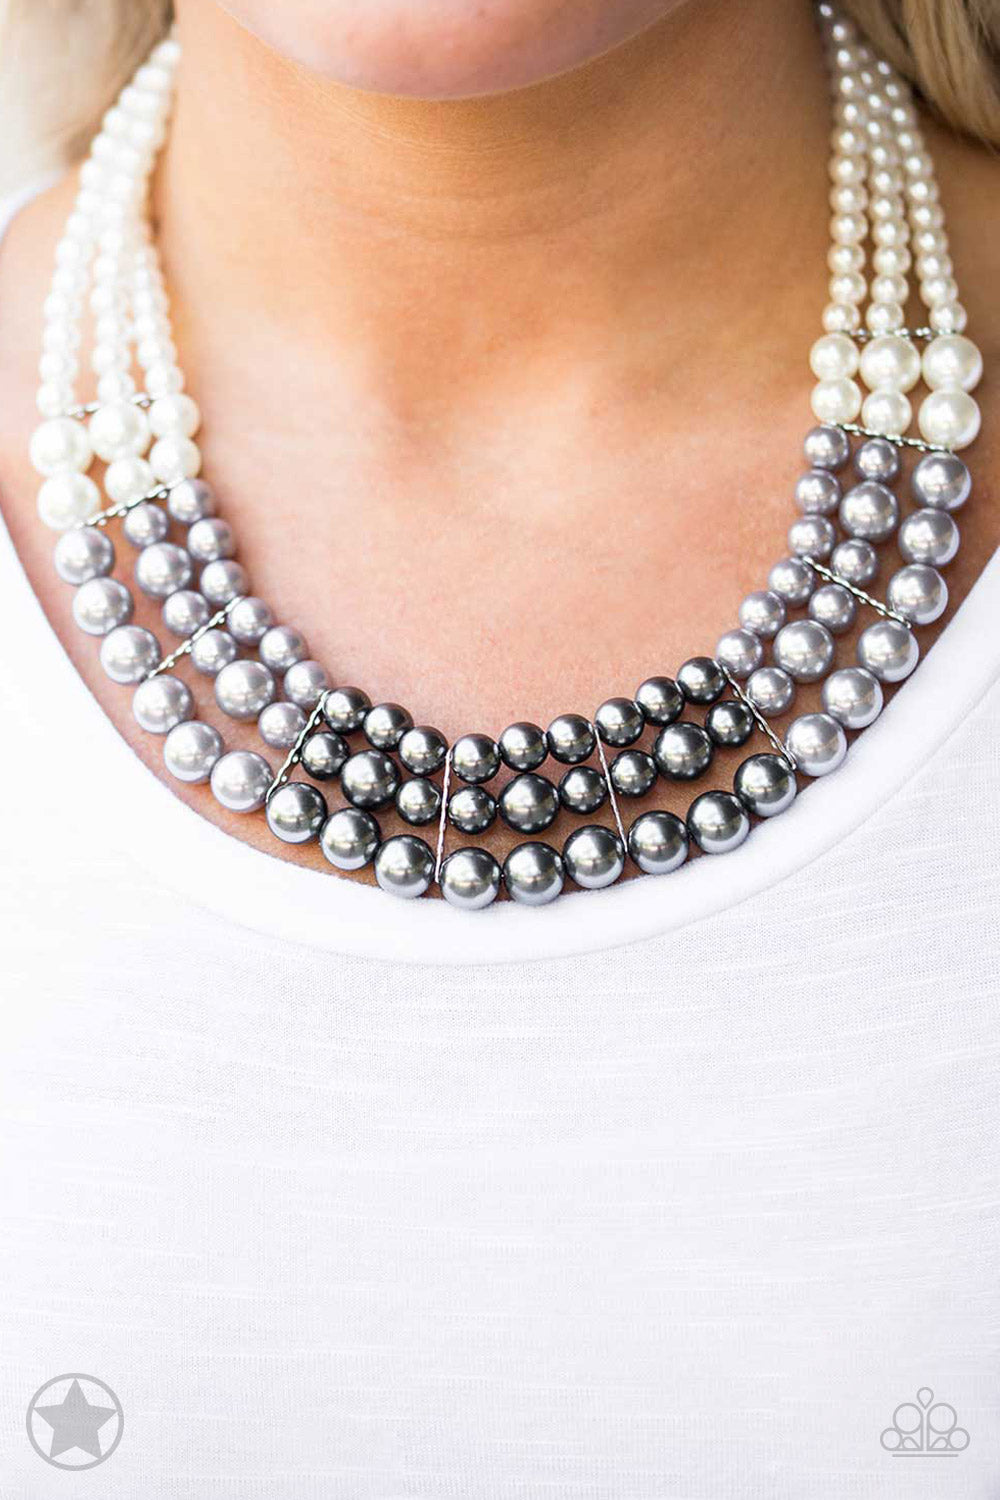 Paparazzi Pearl Necklace with beautiful white, silver and grey pearls throughout. Peeks of bling shining throughout.